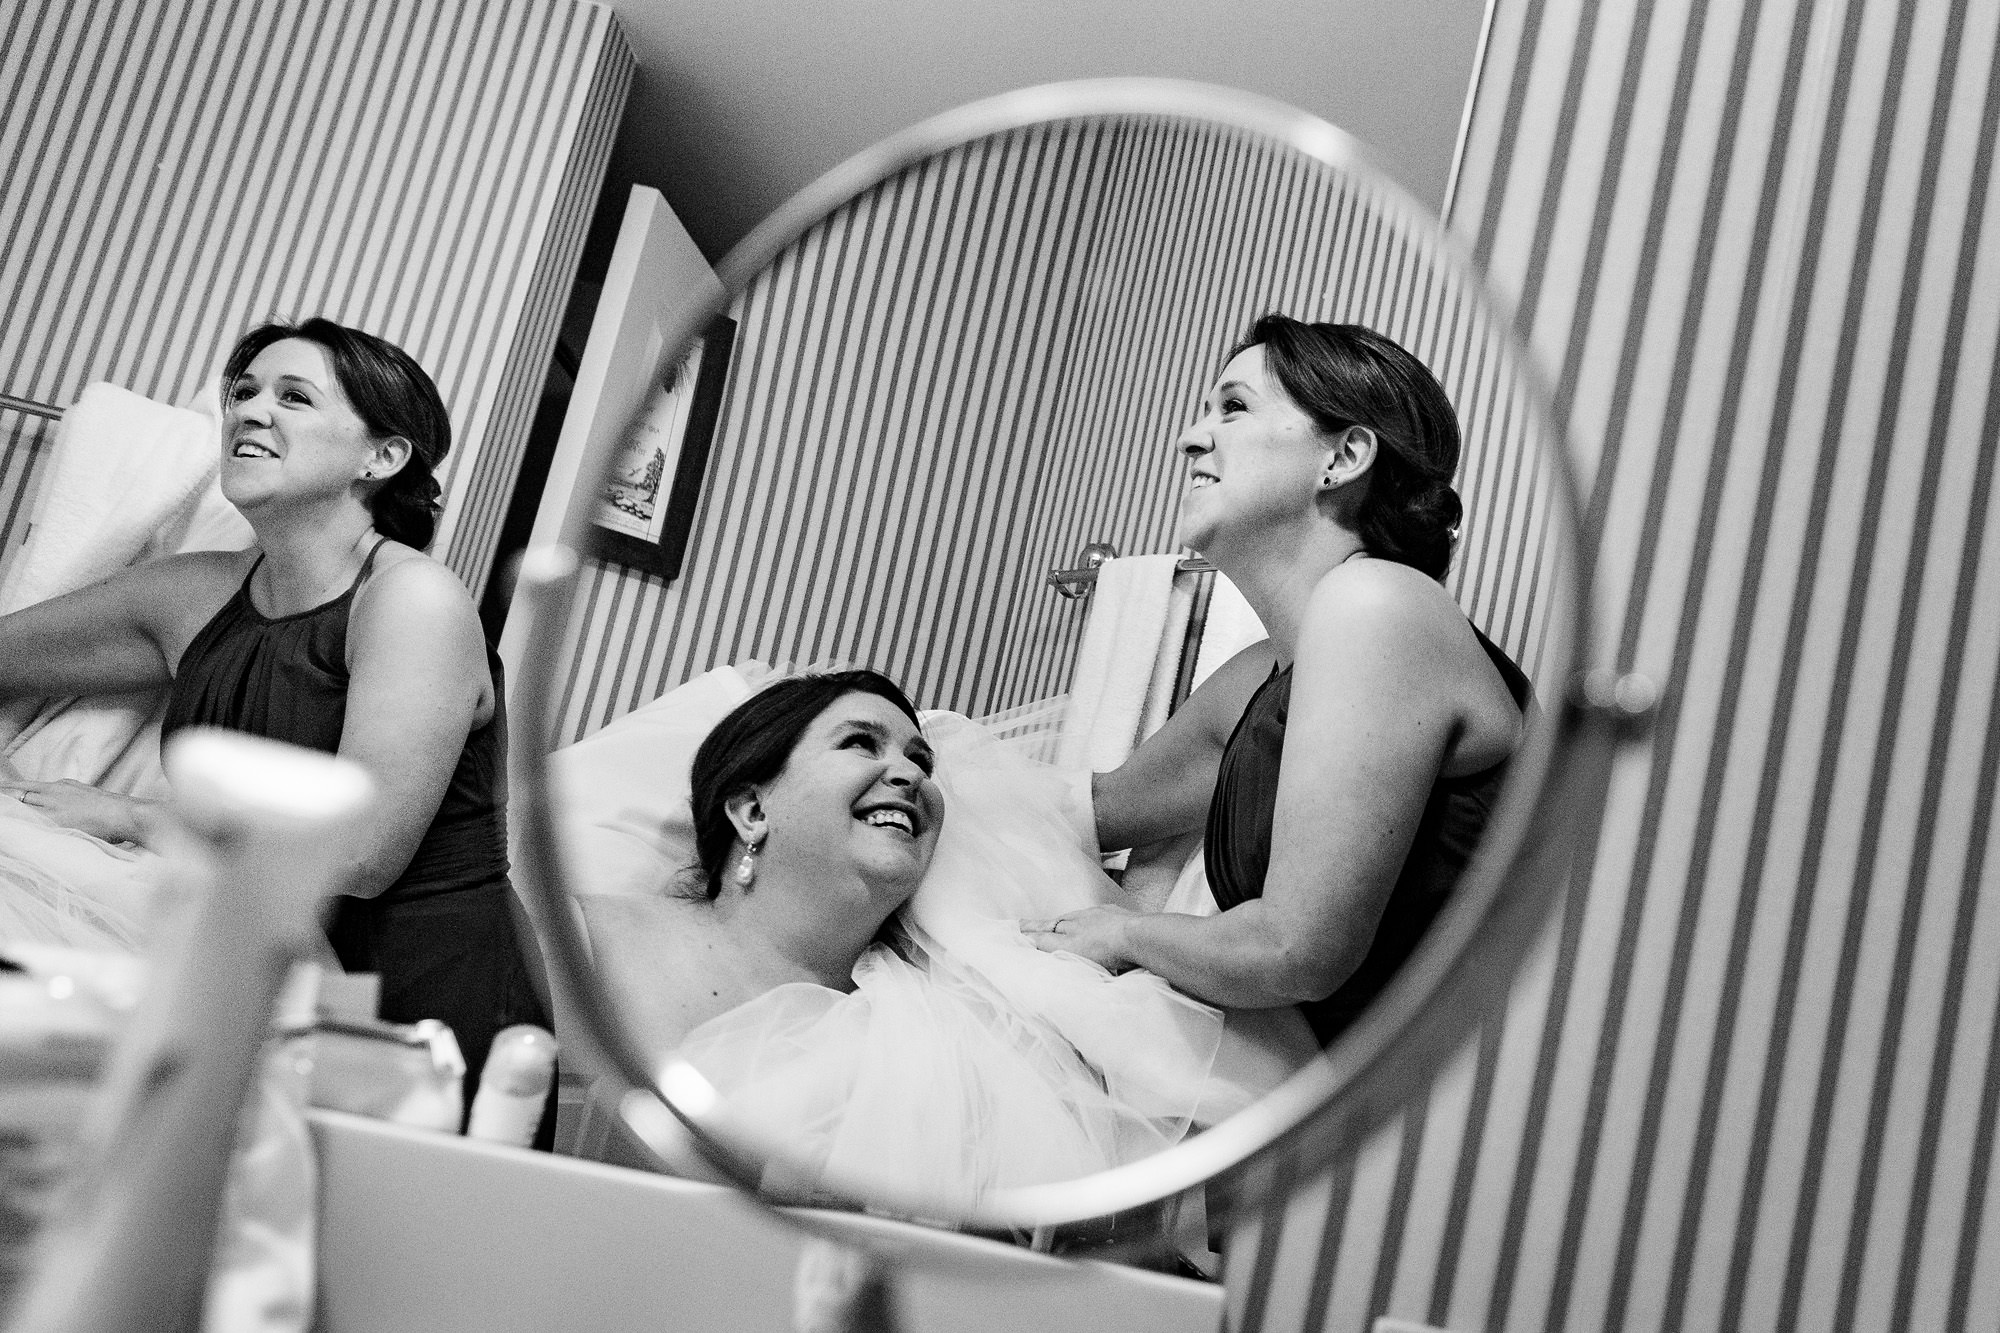 A bride laughs as she tries to use the bathroom while wearing her wedding dress